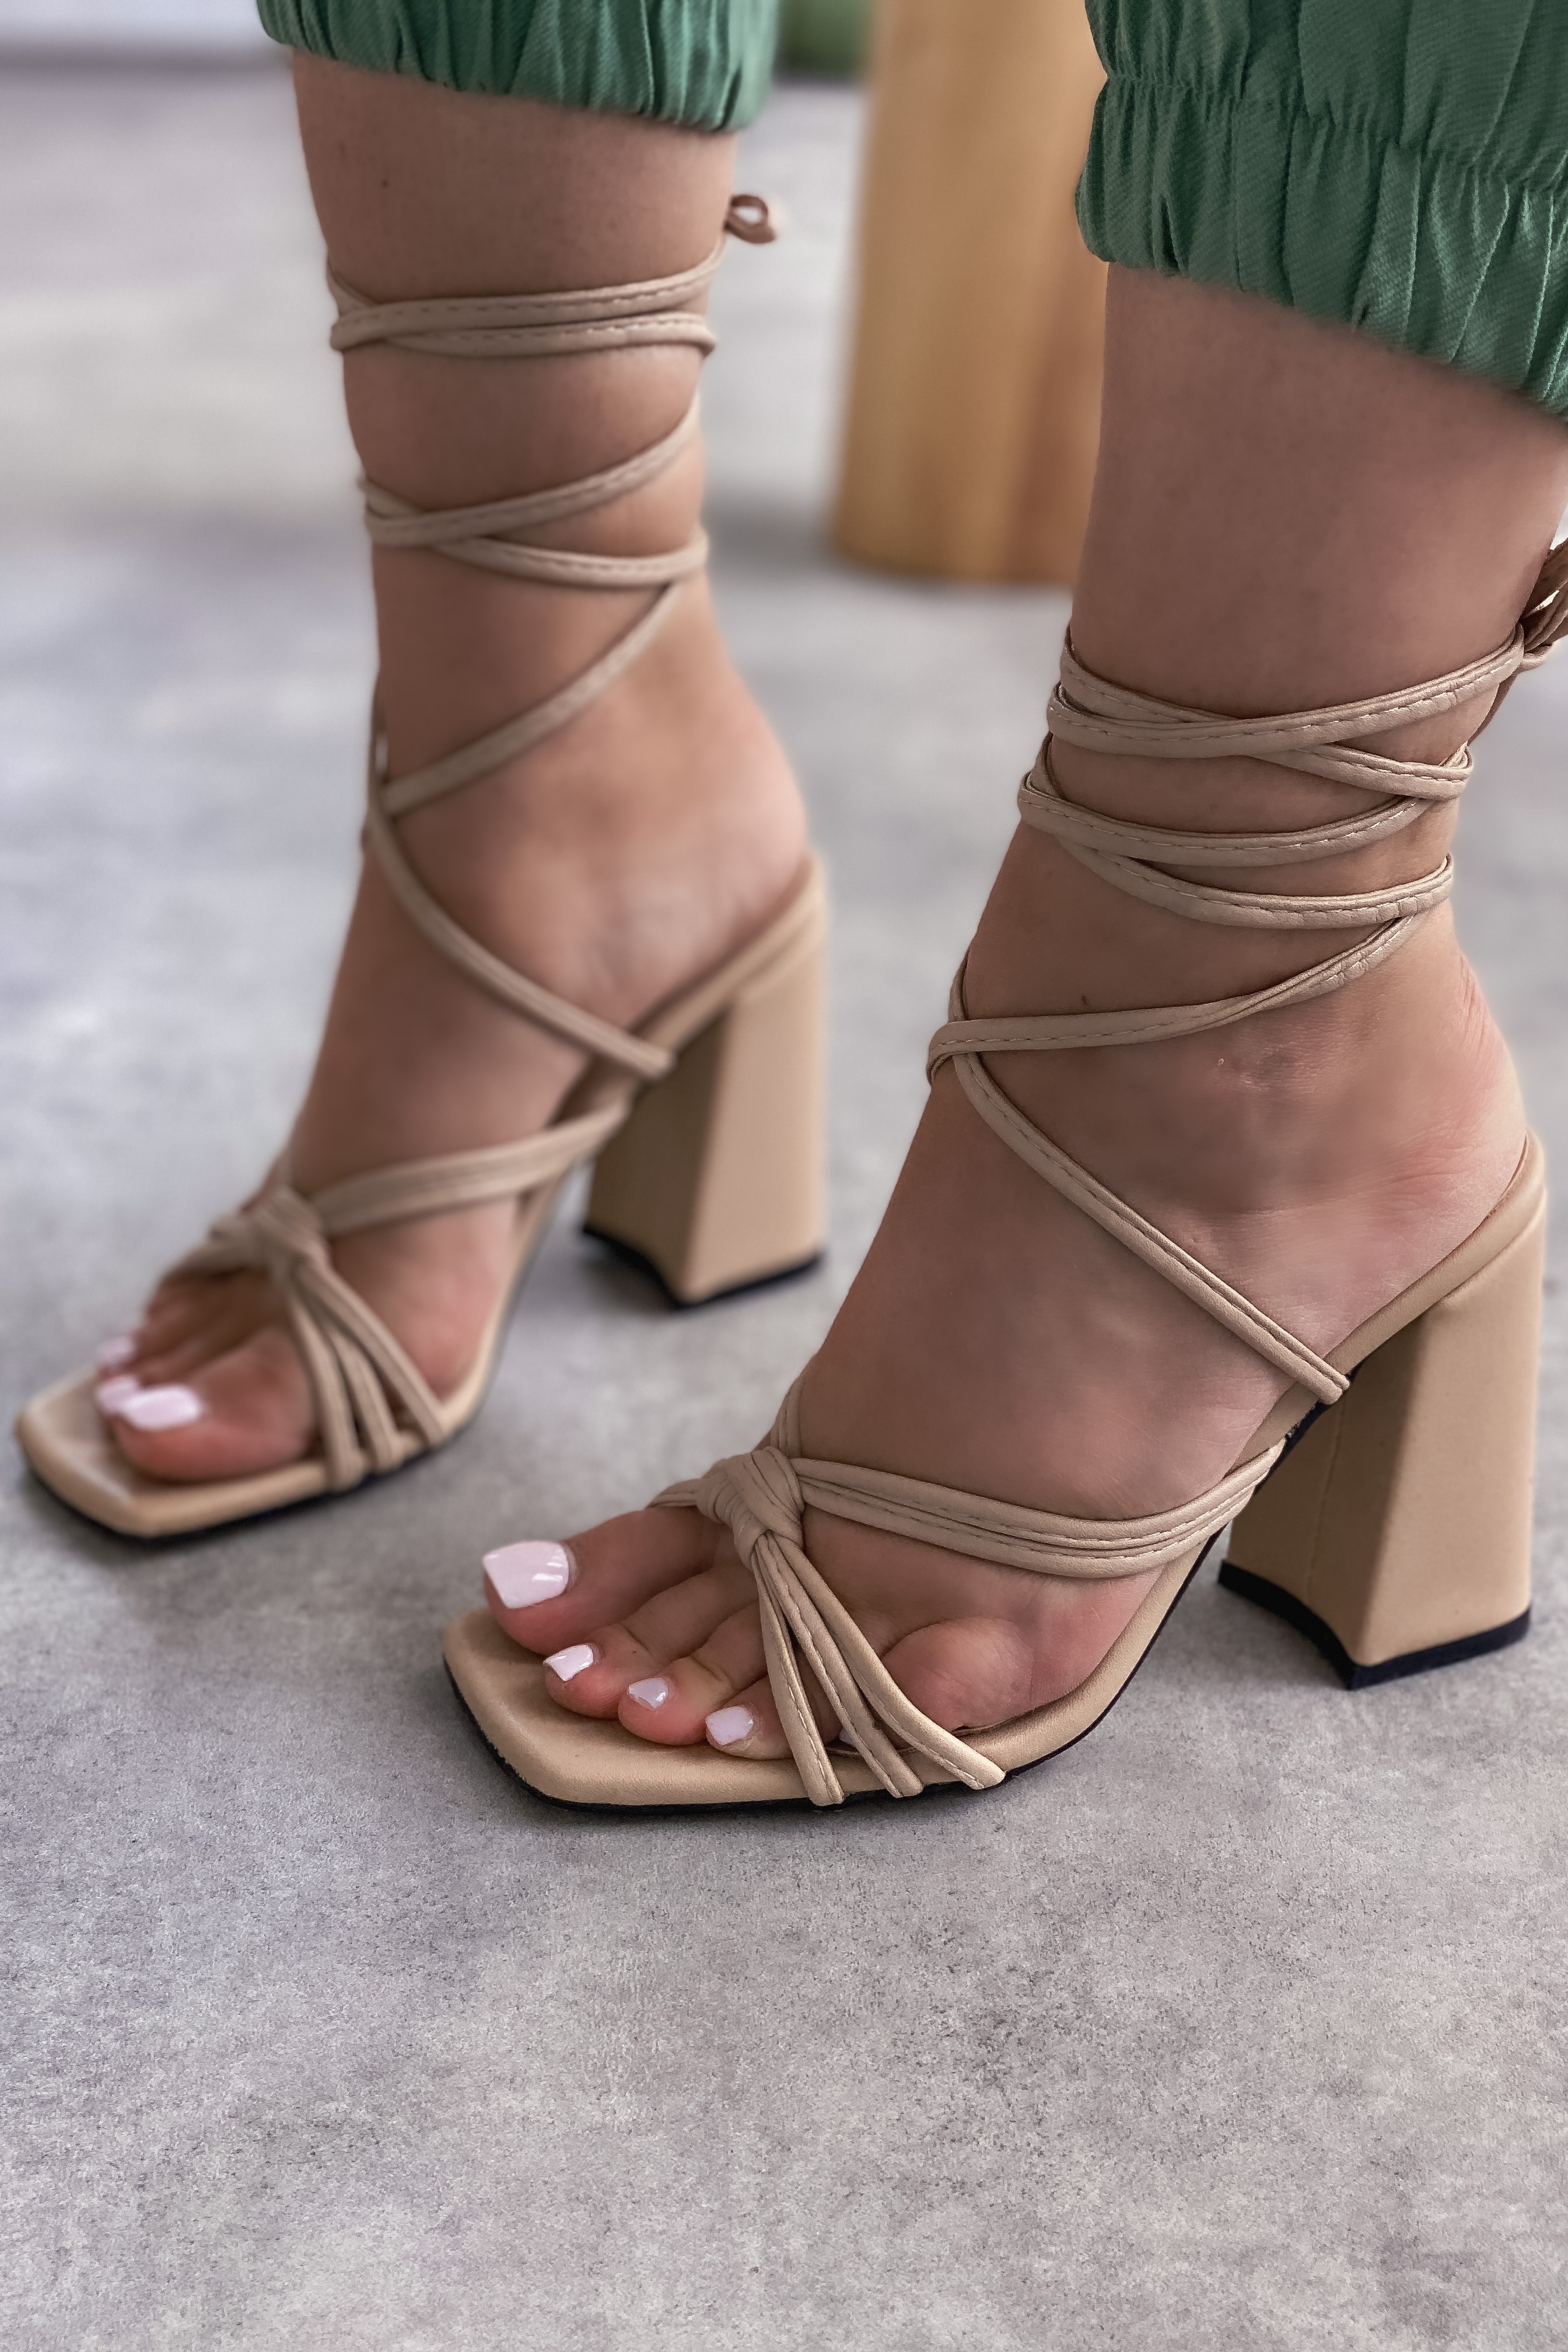 Rondepa matte leather high heels shoes nude